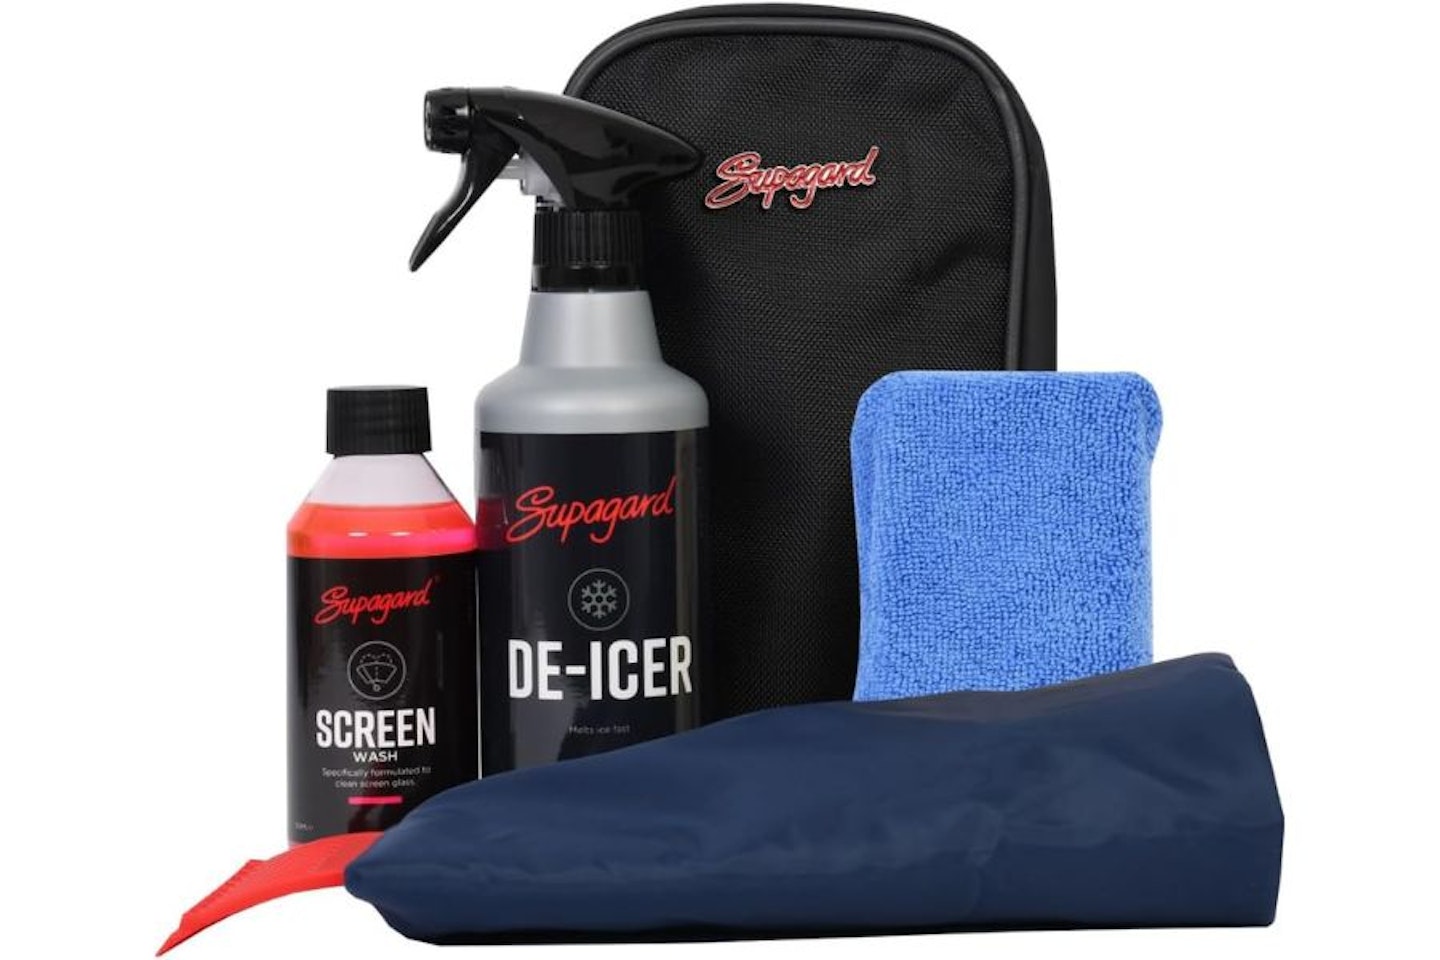 The best de-icer to use this winter